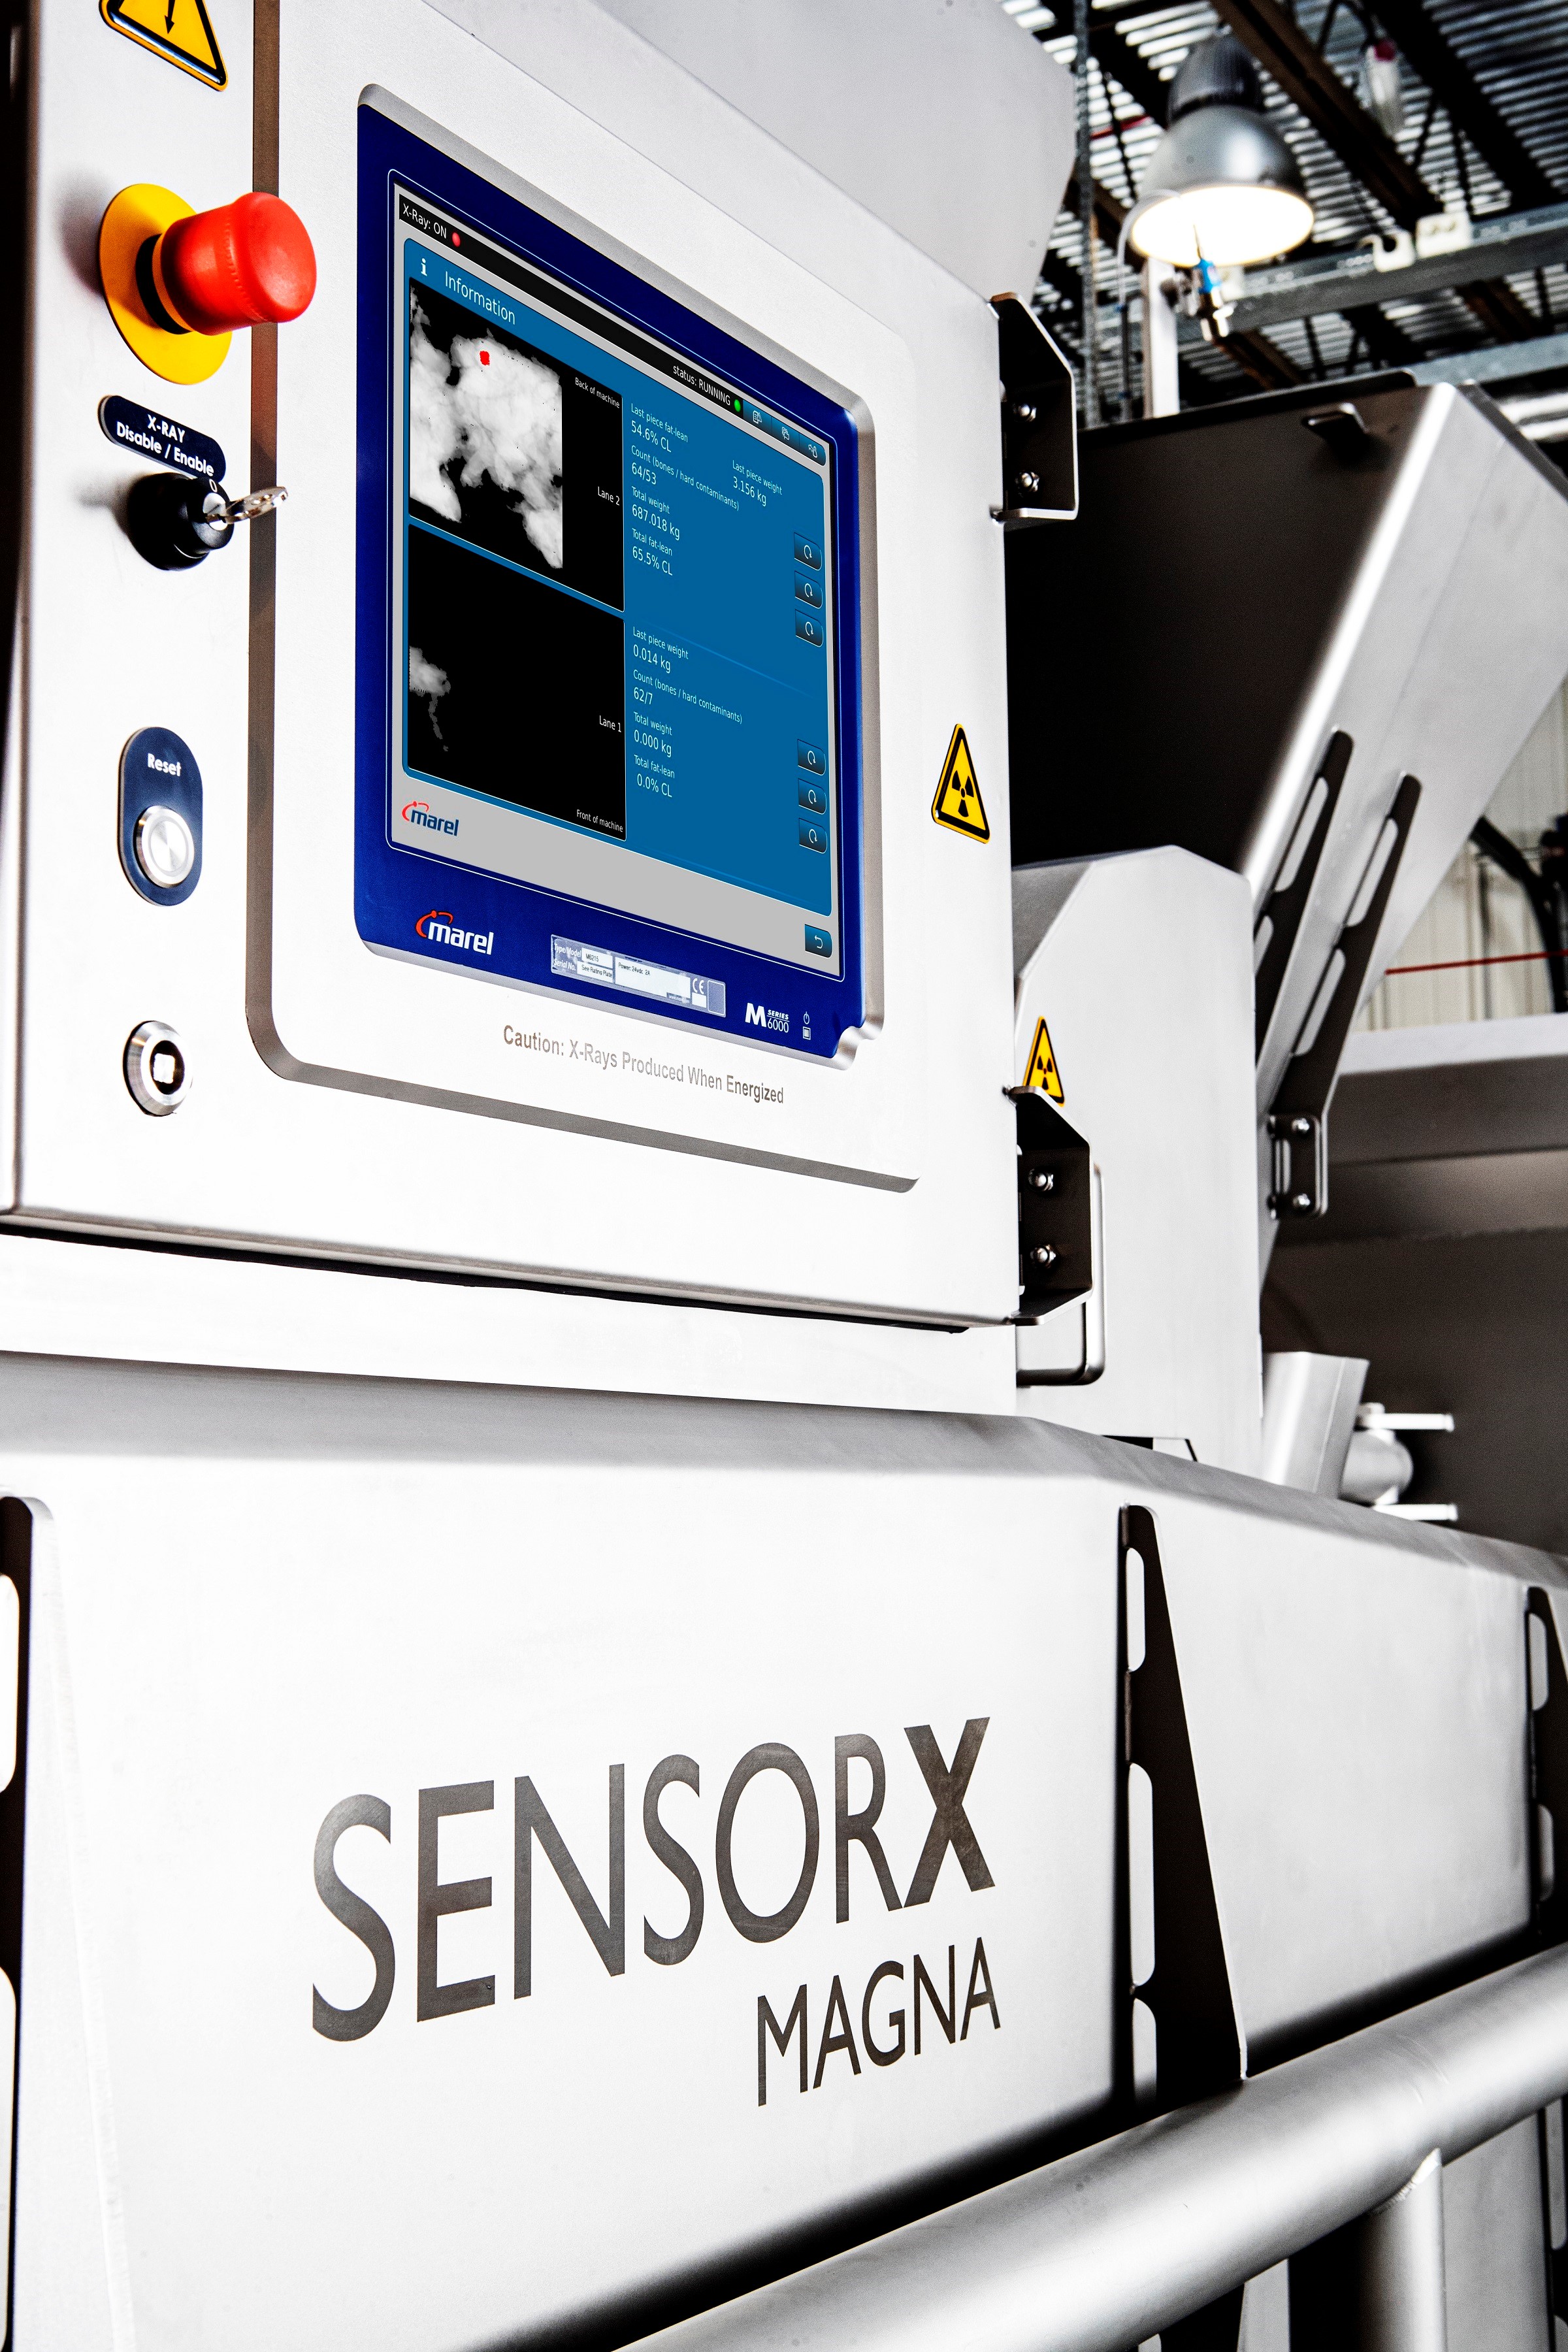 : X-ray inspection systems ensure bone-free chicken meat increasing food safety